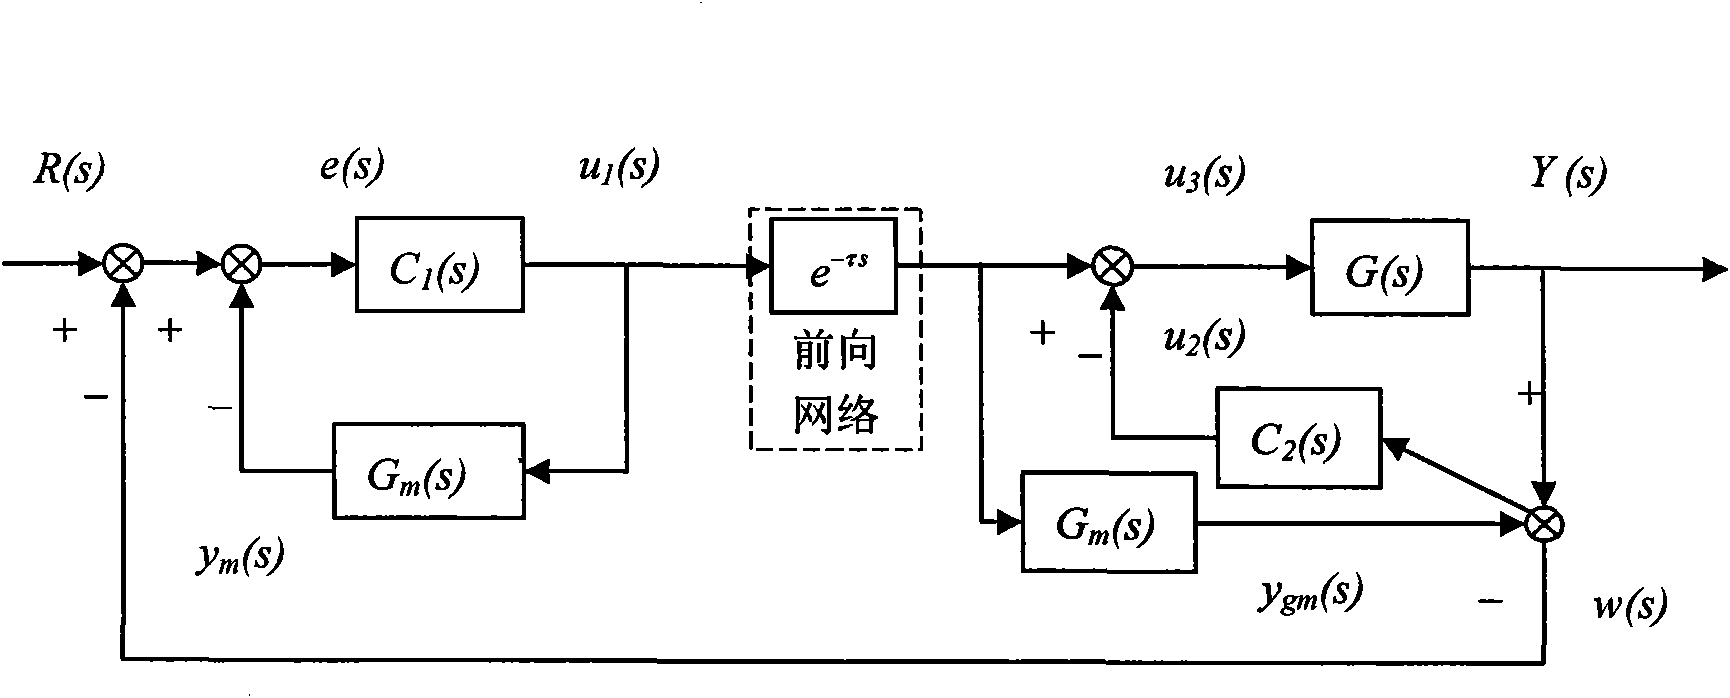 Time delay compensation method with double-control function between transmitter (controller) and actuator